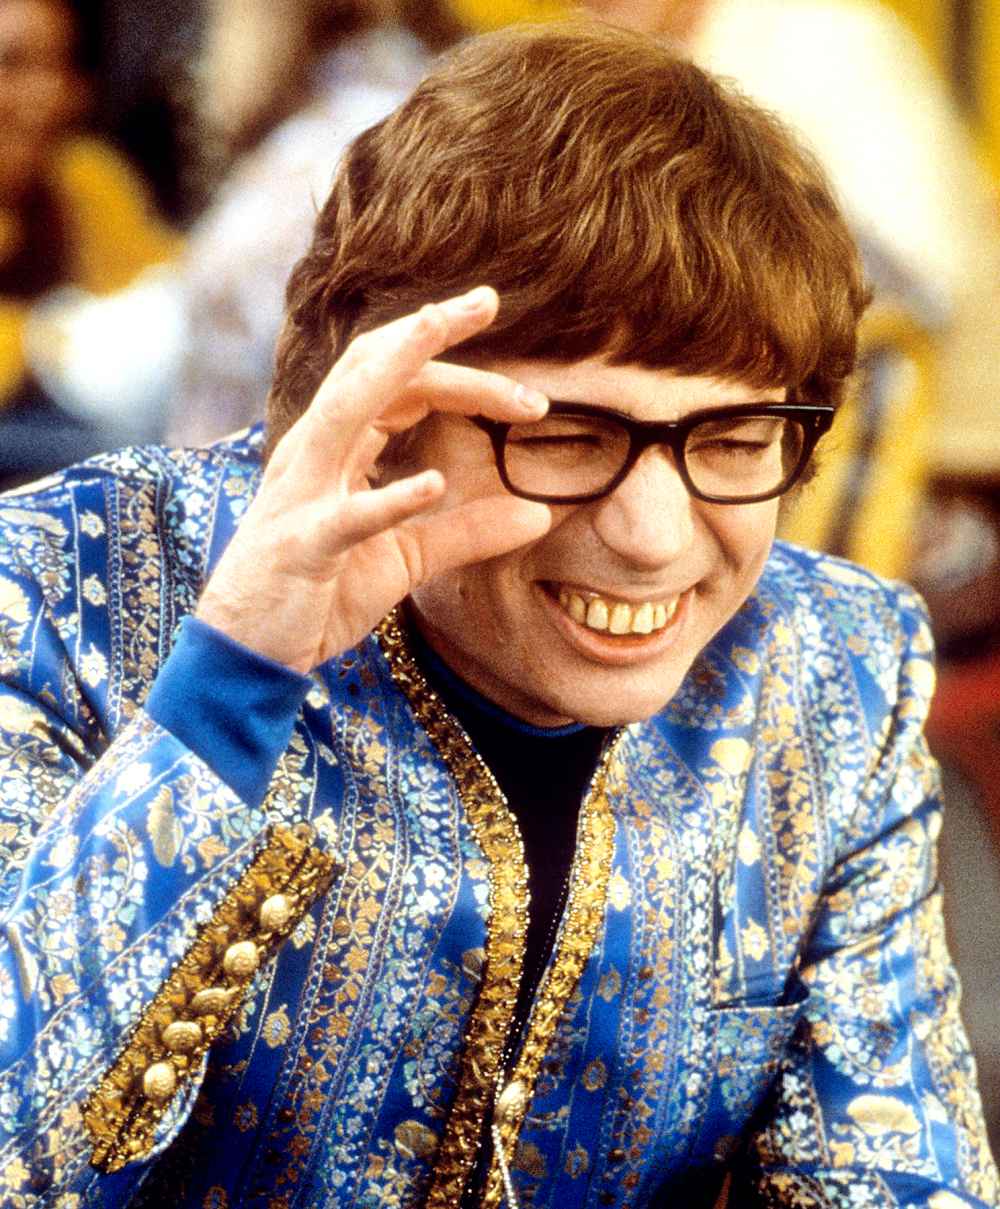 First 'Austin Powers' Movie Opened 20 Years Ago